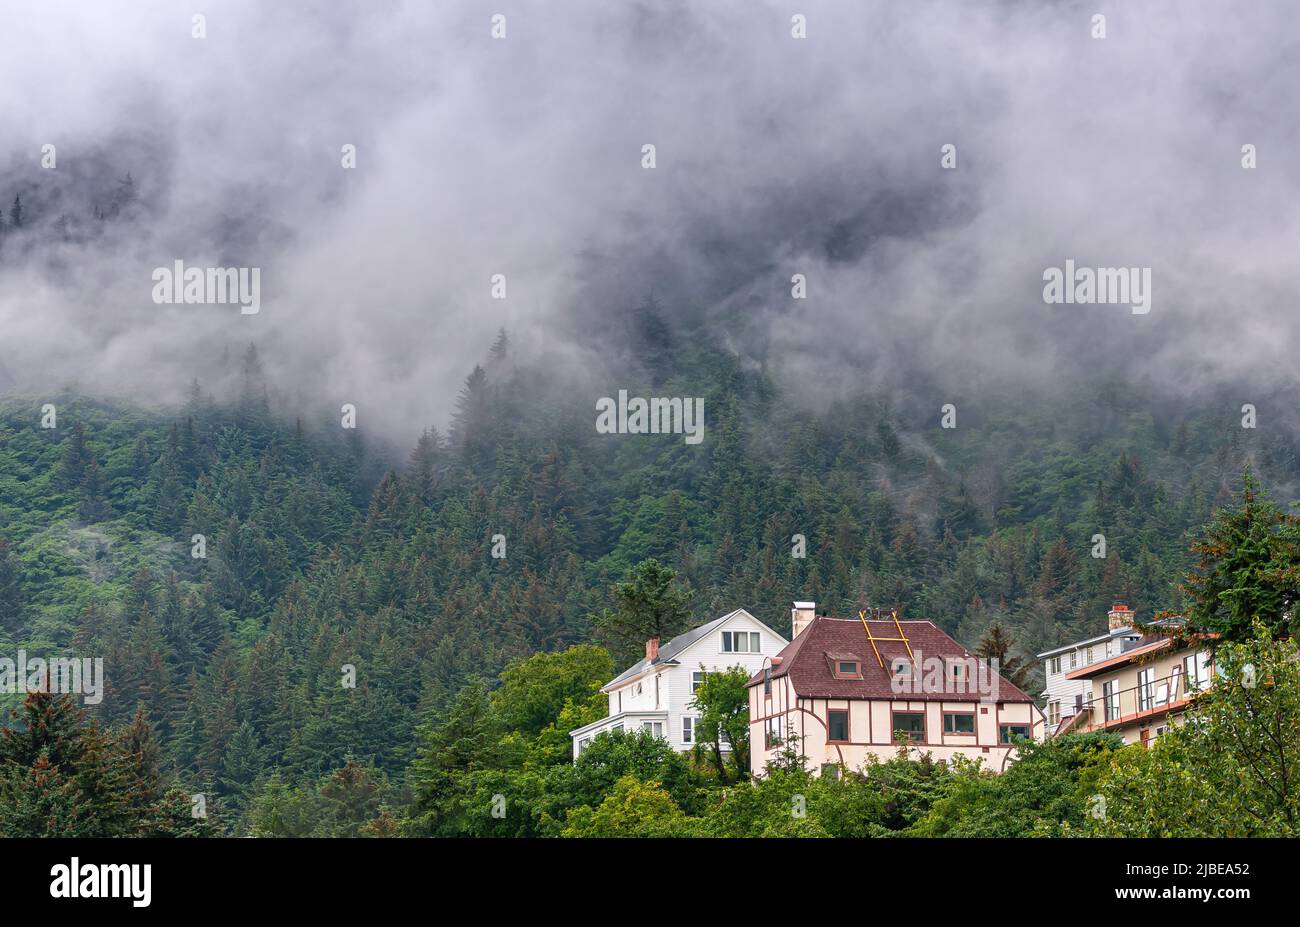 Juneau, Alaska, USA - July 19, 2011: Small group of larger houses peek out of pine forest on slopes of mountain, partly covered by low hanging gray cl Stock Photo